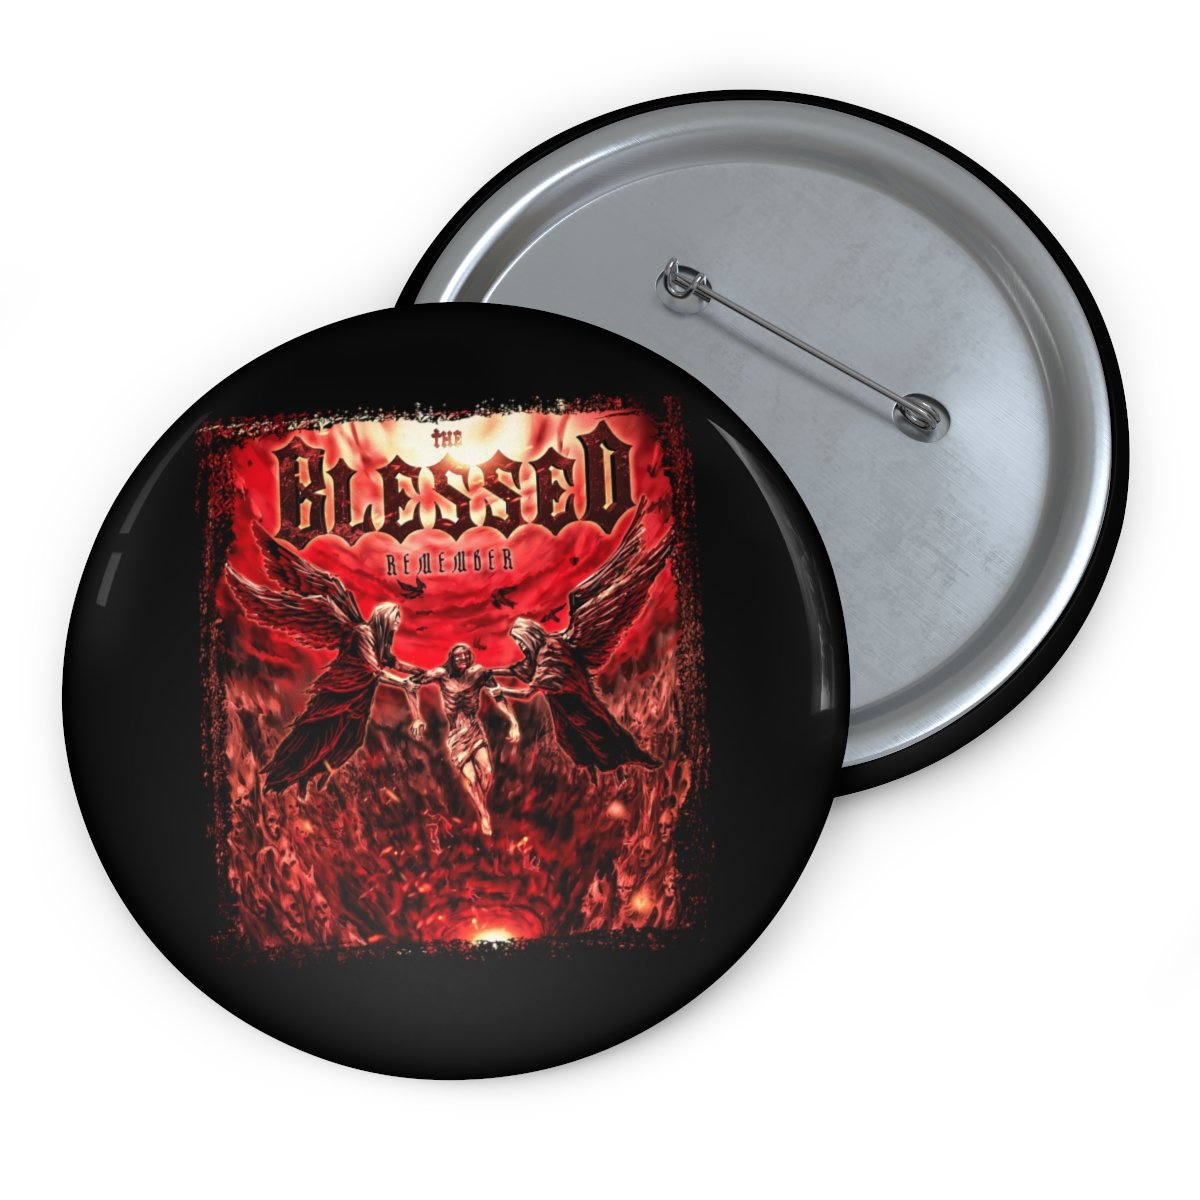 The Blessed – Remember Pin Buttons